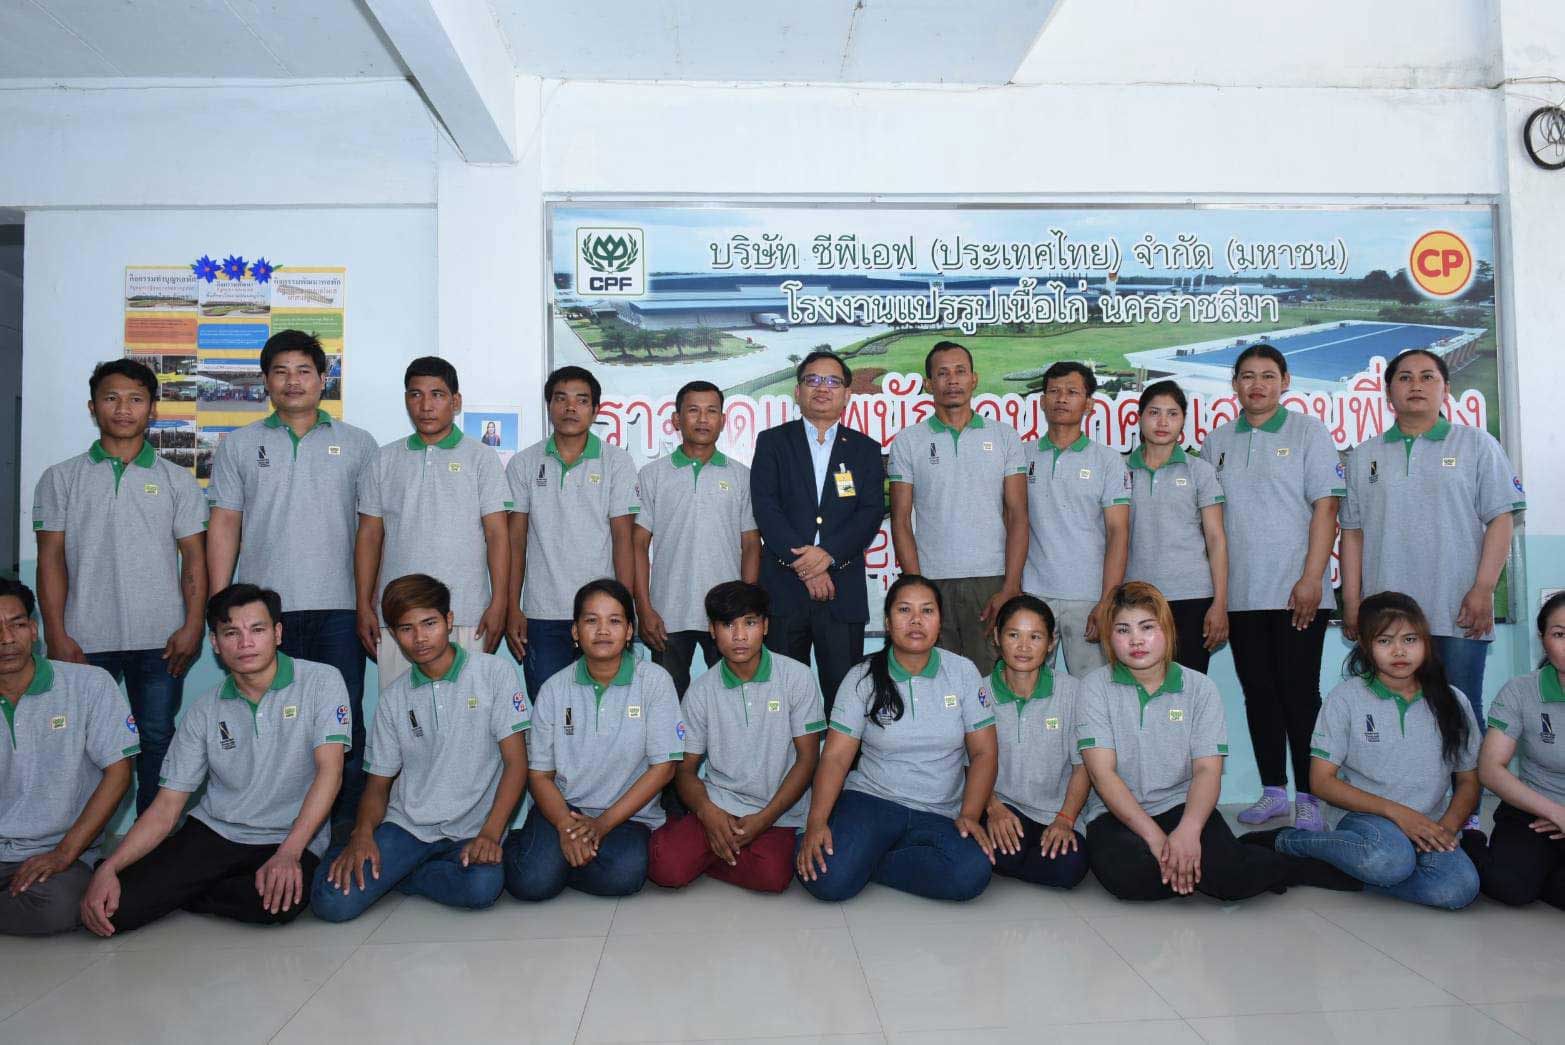 Cambodia's Ambassador Witnesses International Labour and Human Rights Practices at CPF's Chicken Processing Plant